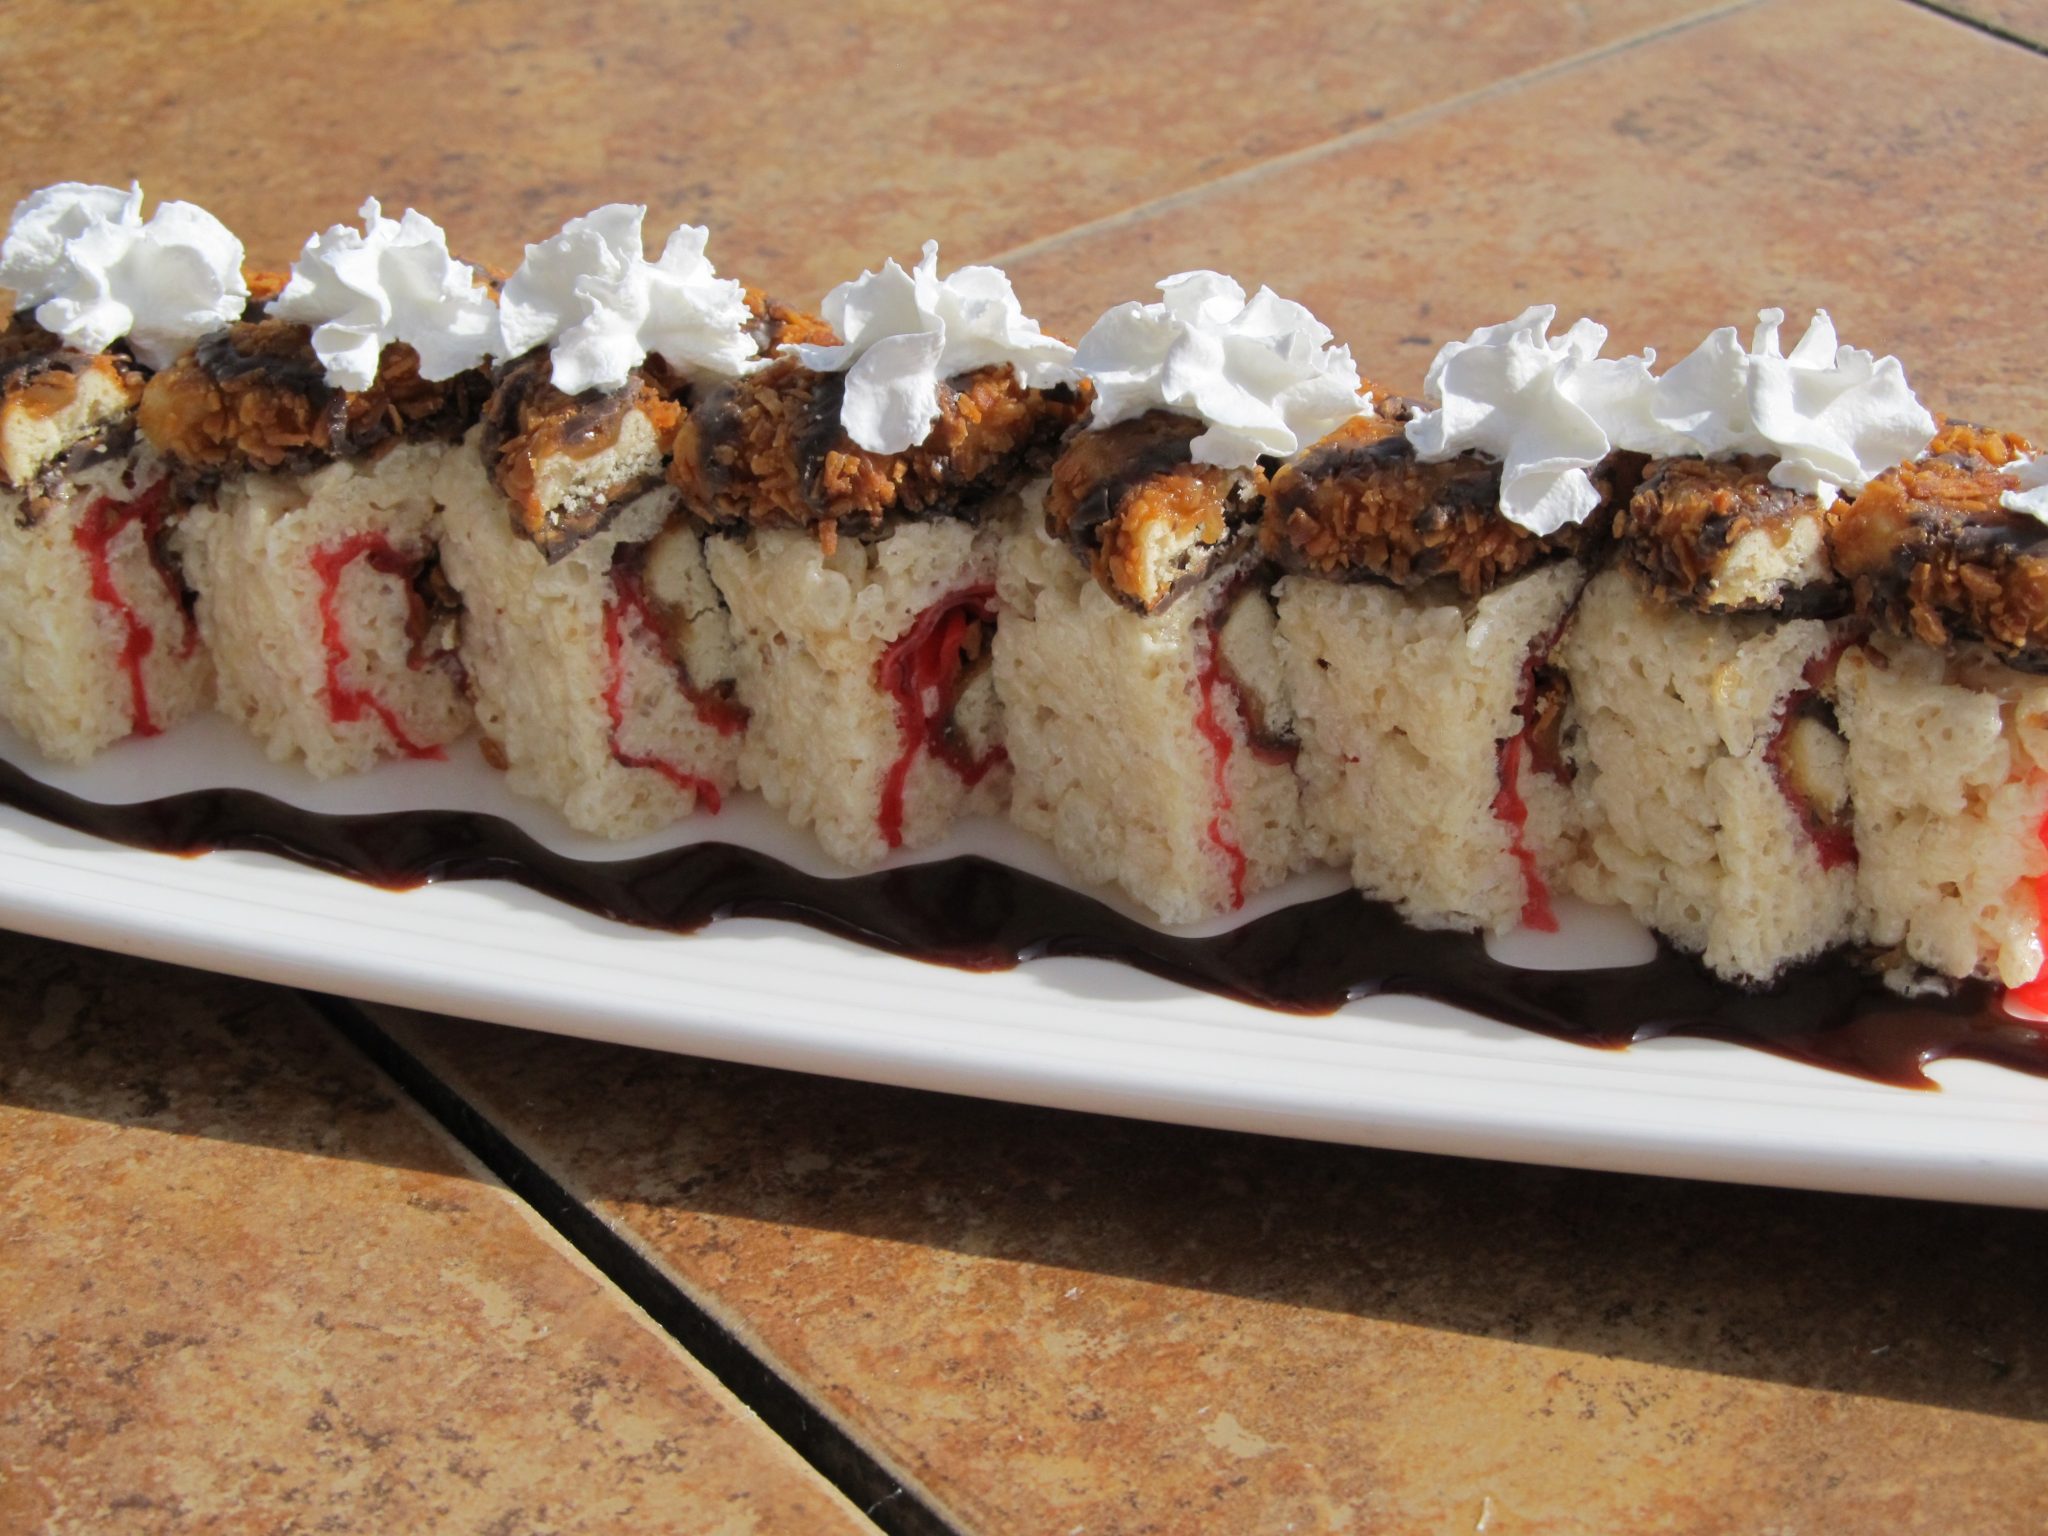 Blue Wasabi's Girl Scout Cookie Roll by Kelly Potts